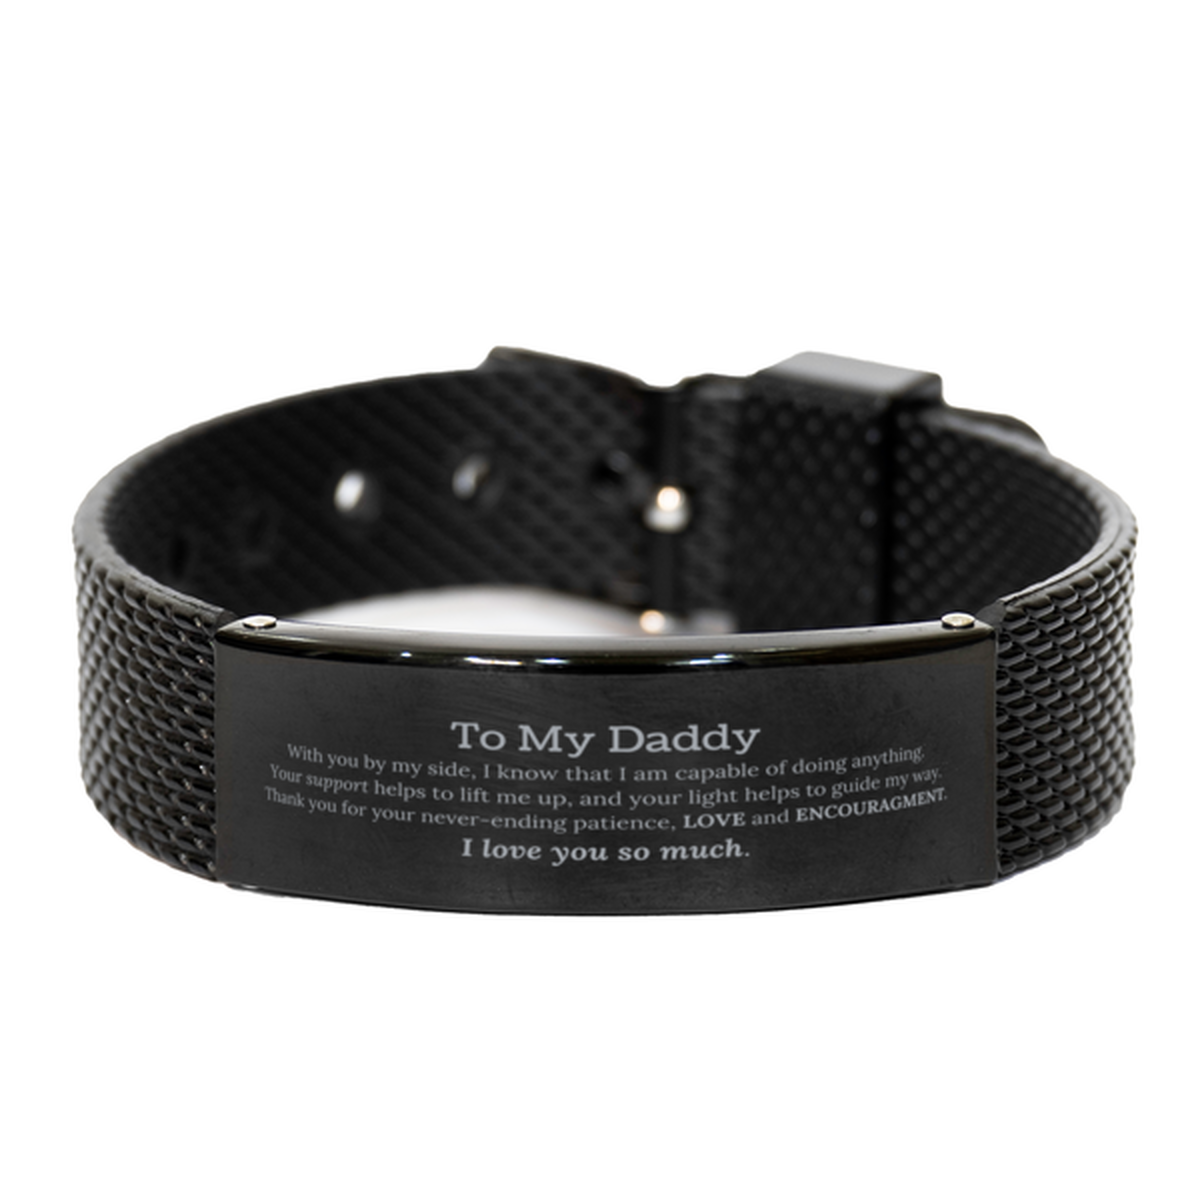 Appreciation Daddy Black Shark Mesh Bracelet Gifts, To My Daddy Birthday Christmas Wedding Keepsake Gifts for Daddy With you by my side, I know that I am capable of doing anything. I love you so much